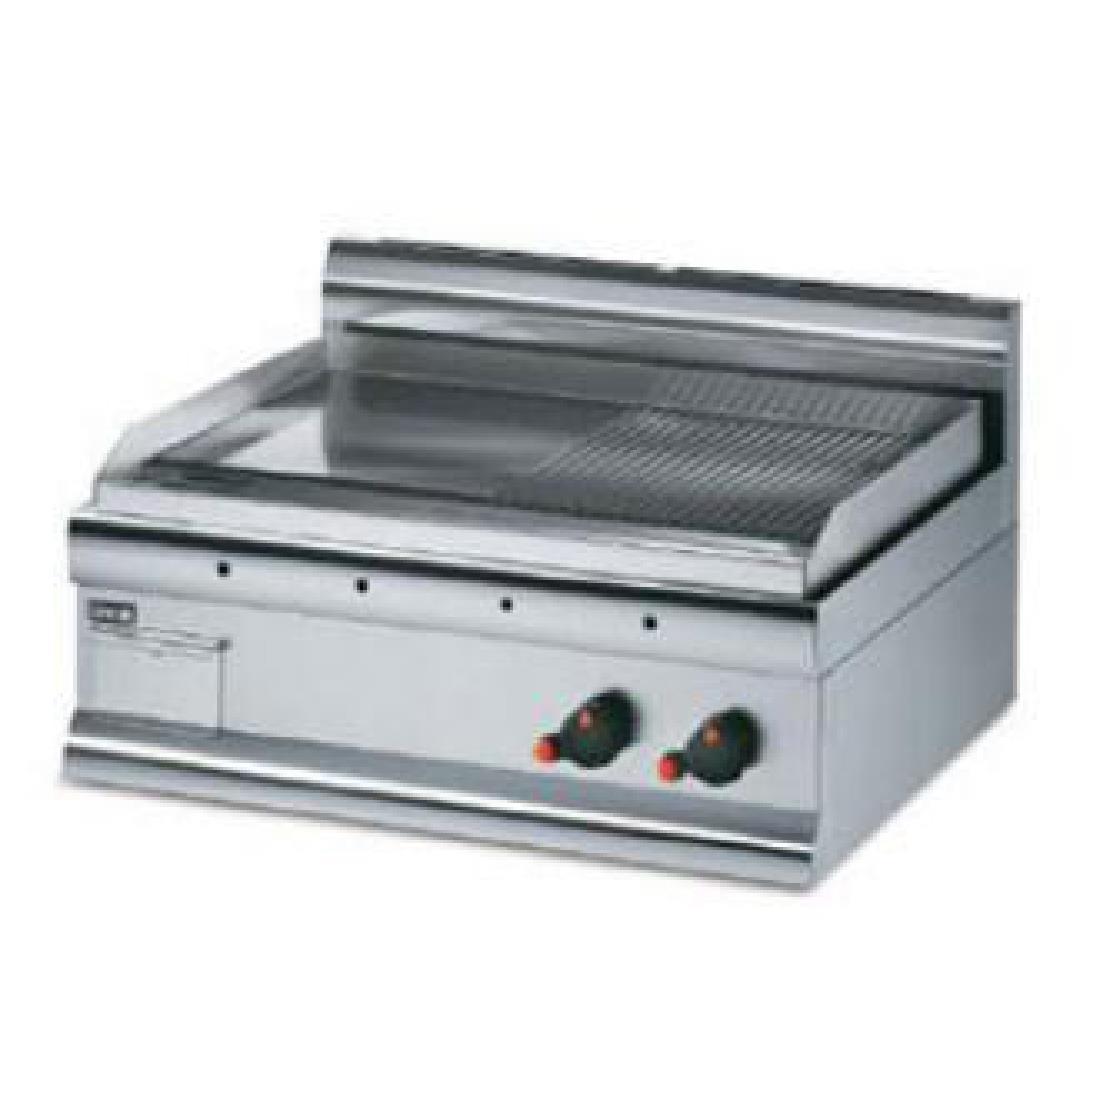 Lincat Silverlink 600 Half Ribbed Dual Zone Electric Griddle GS7/R - E305  - 1